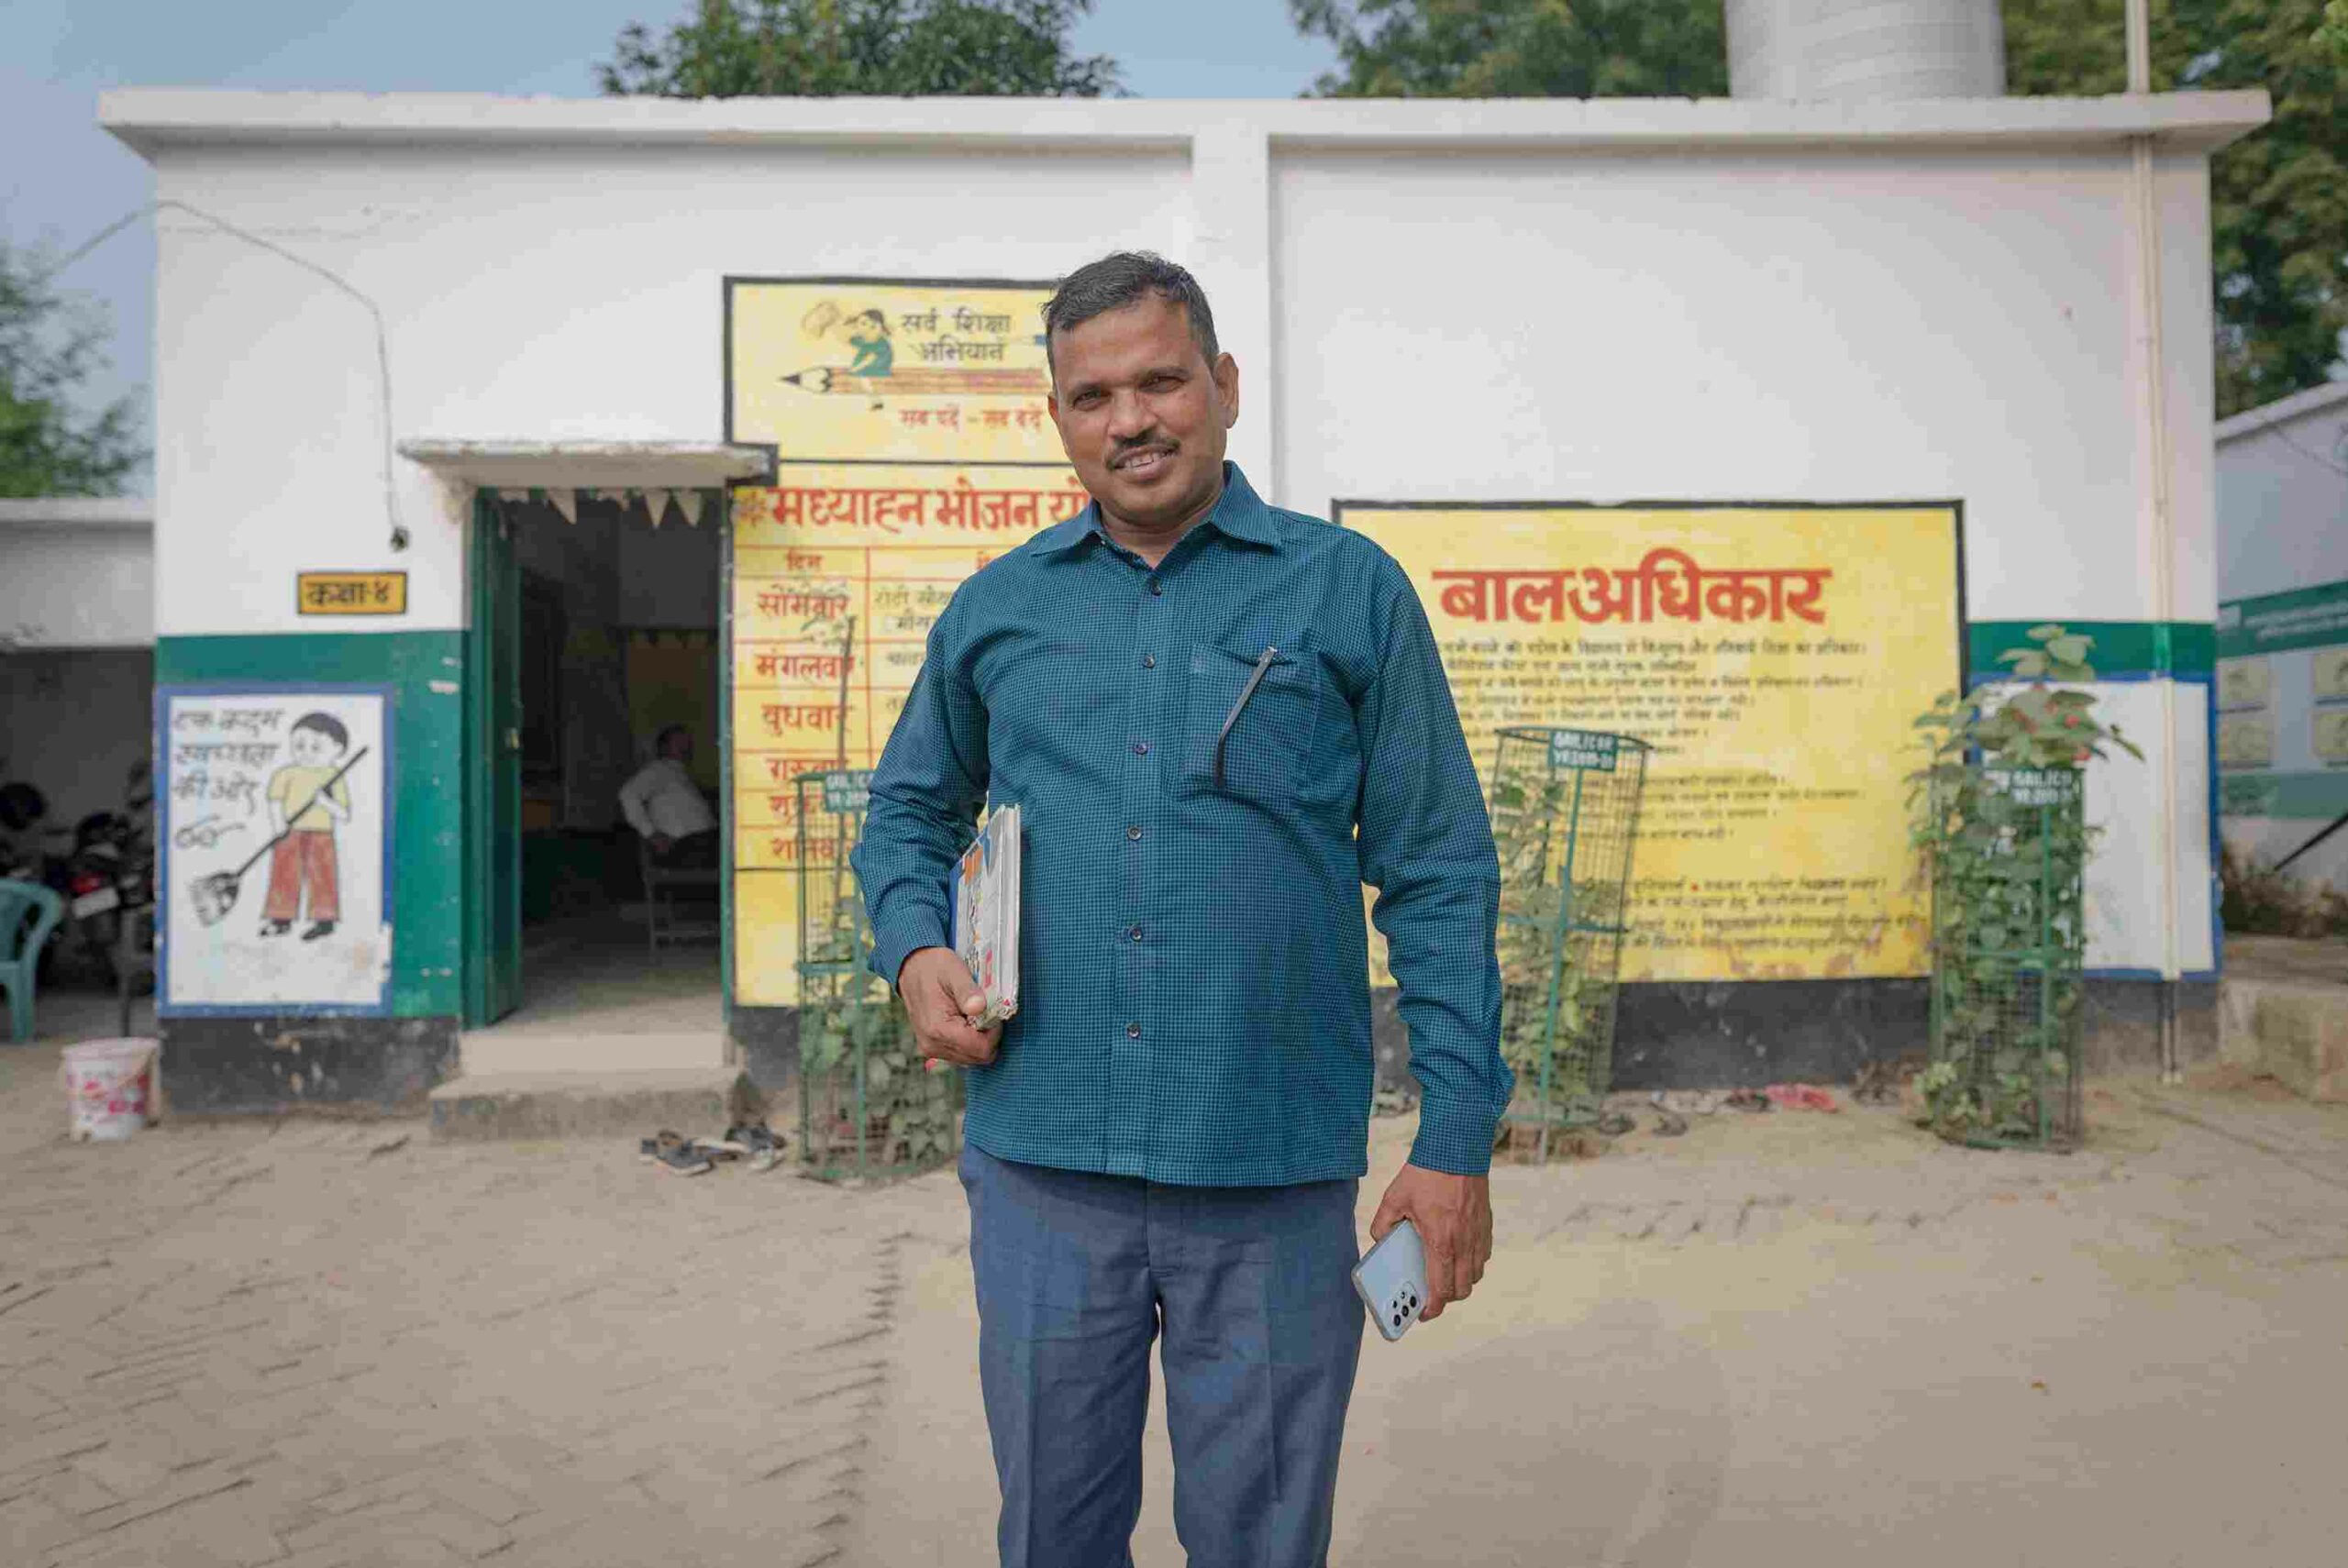 Dr Dineshchand is the Academic Resource Person in Sewapuri